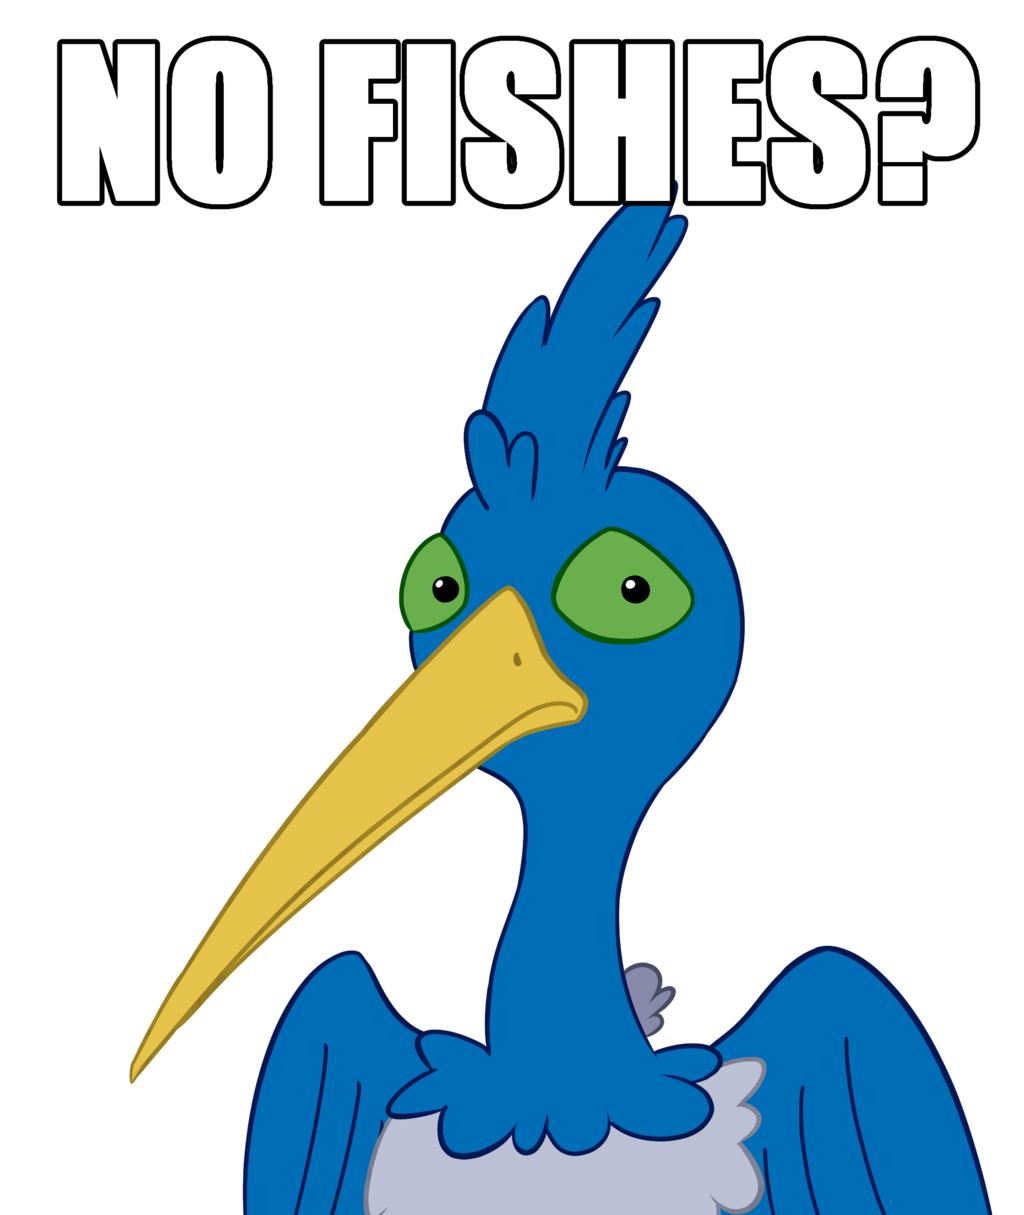 No fishes?